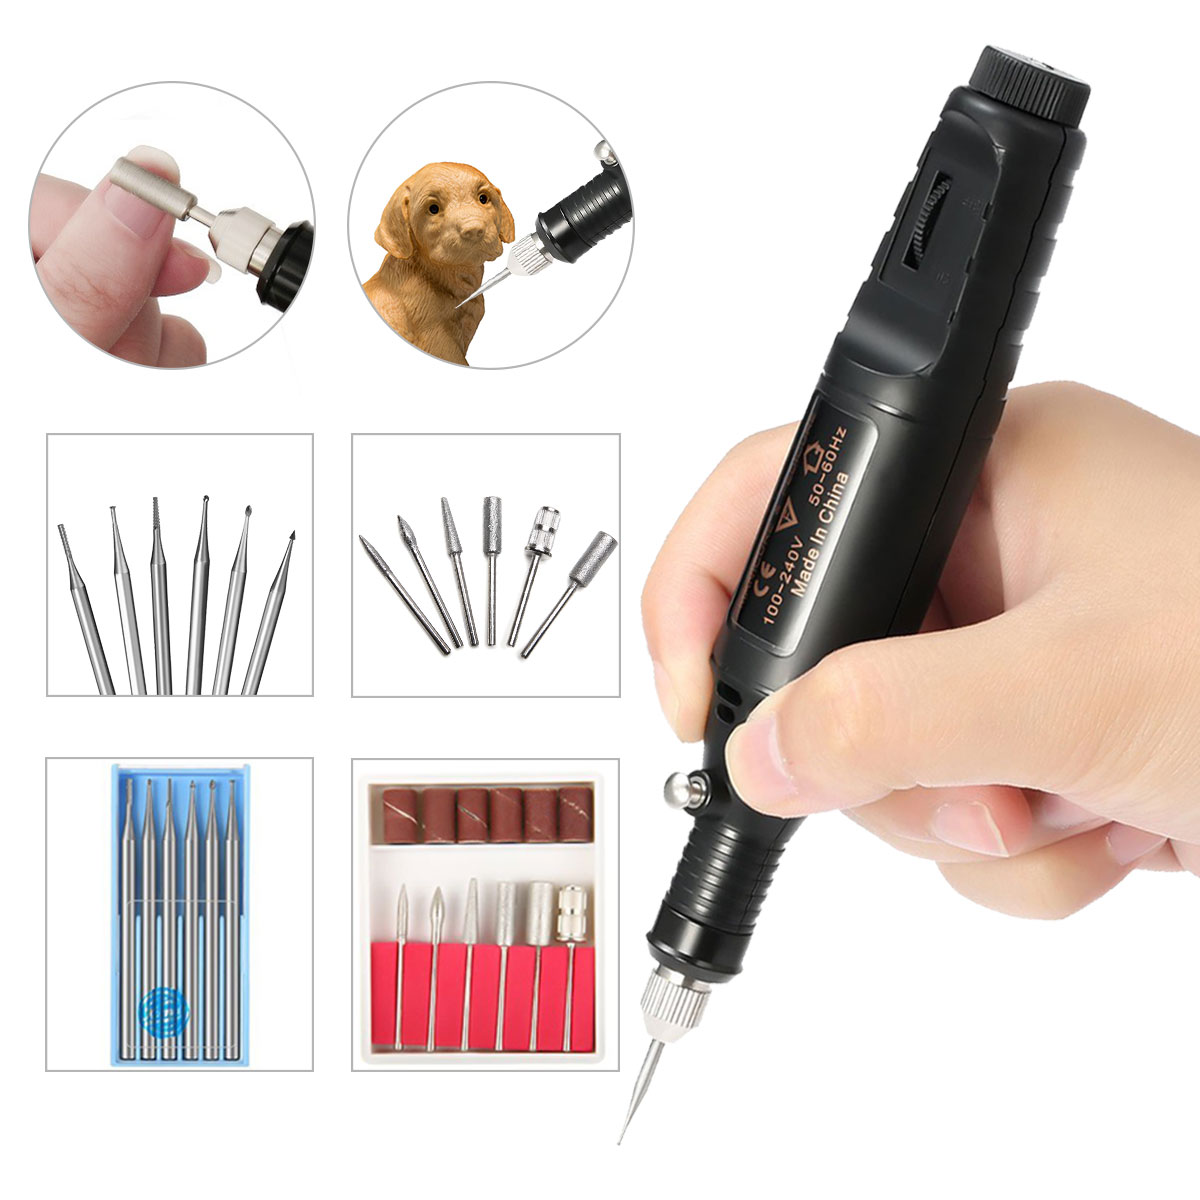 

14 Pcs Adjustable Speed Electric Engraving Pen Carve Carving Tools Kit DIY Jewelry Metal Glass